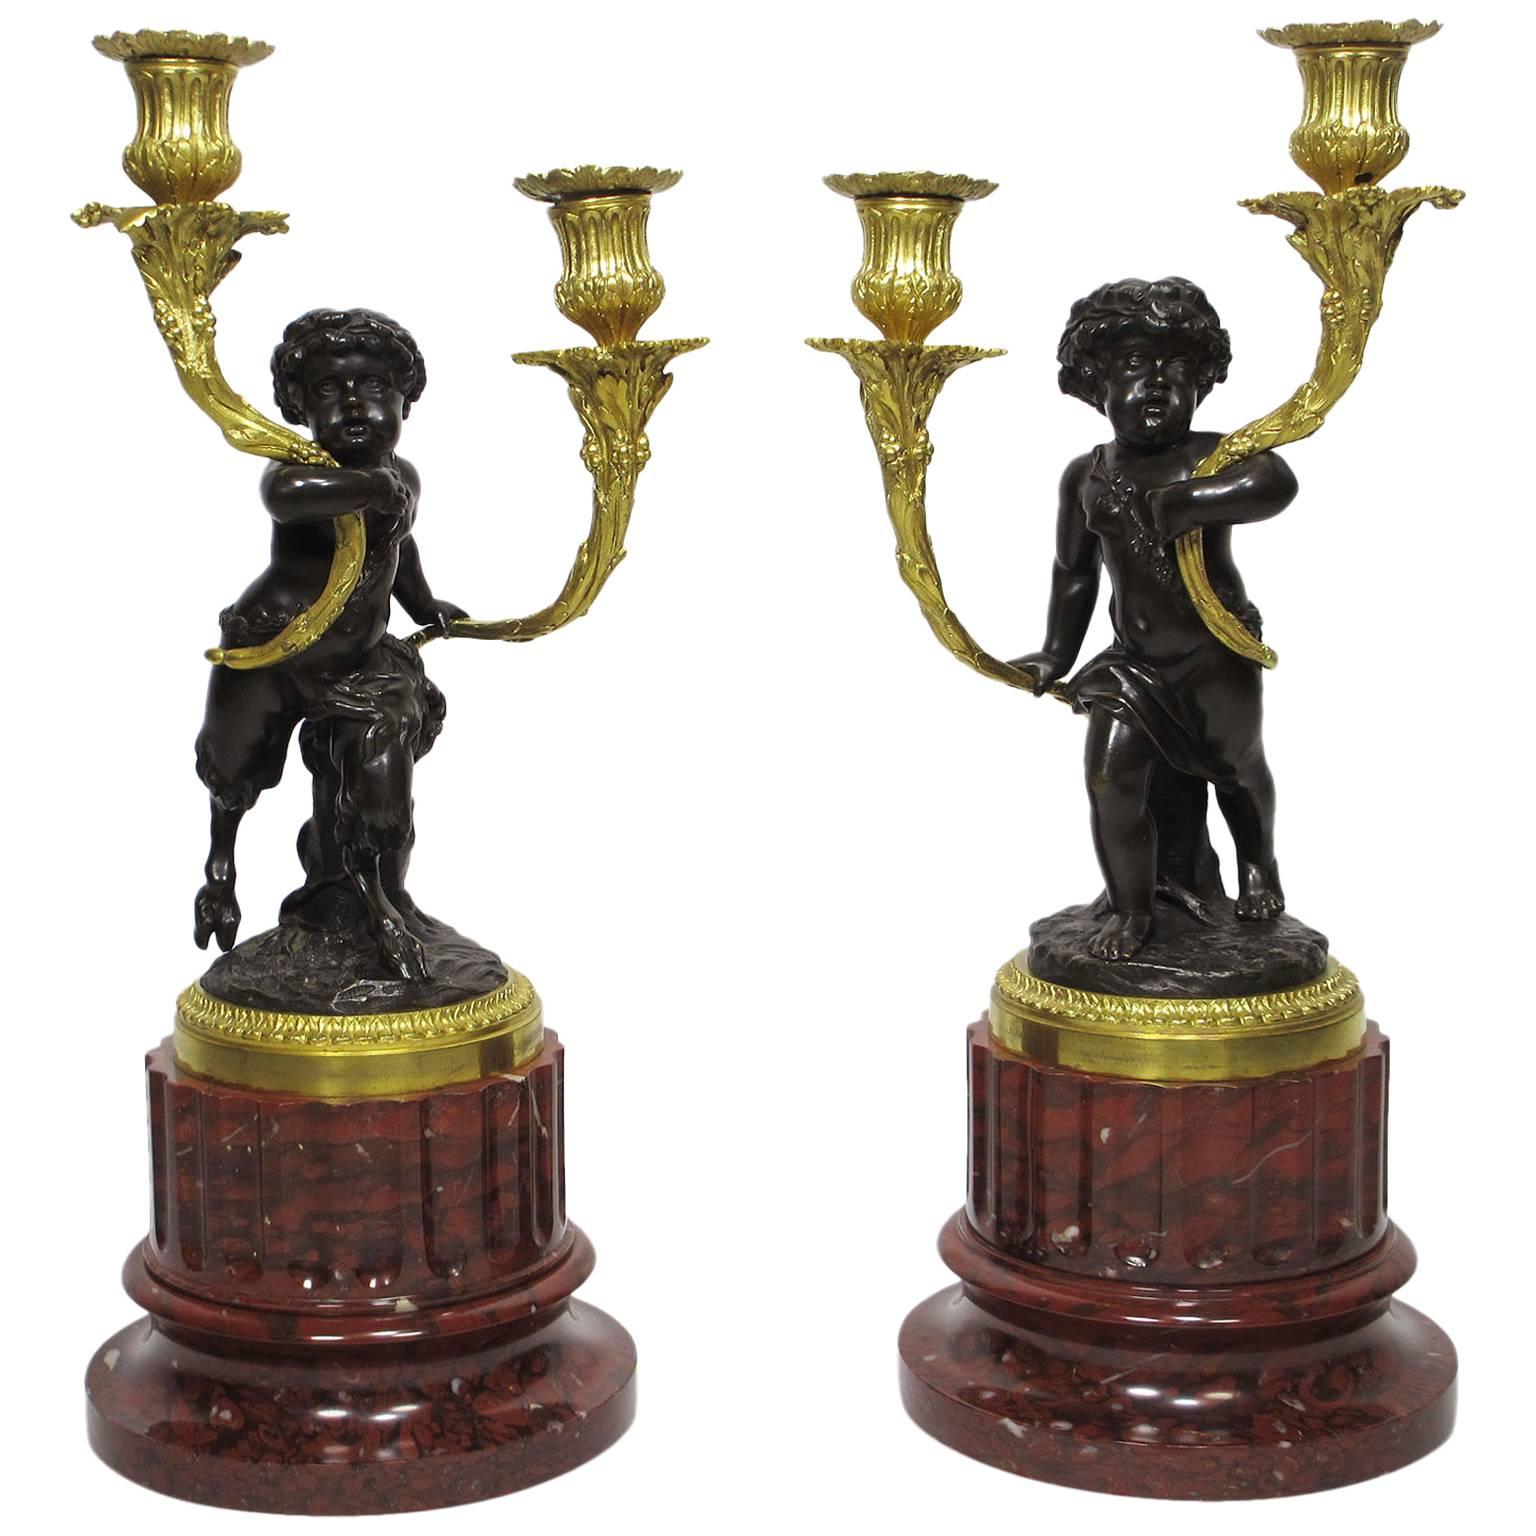 19th Century Louis XVI Style Patinated and Gilt Bronze Figural Candelabra, Pair